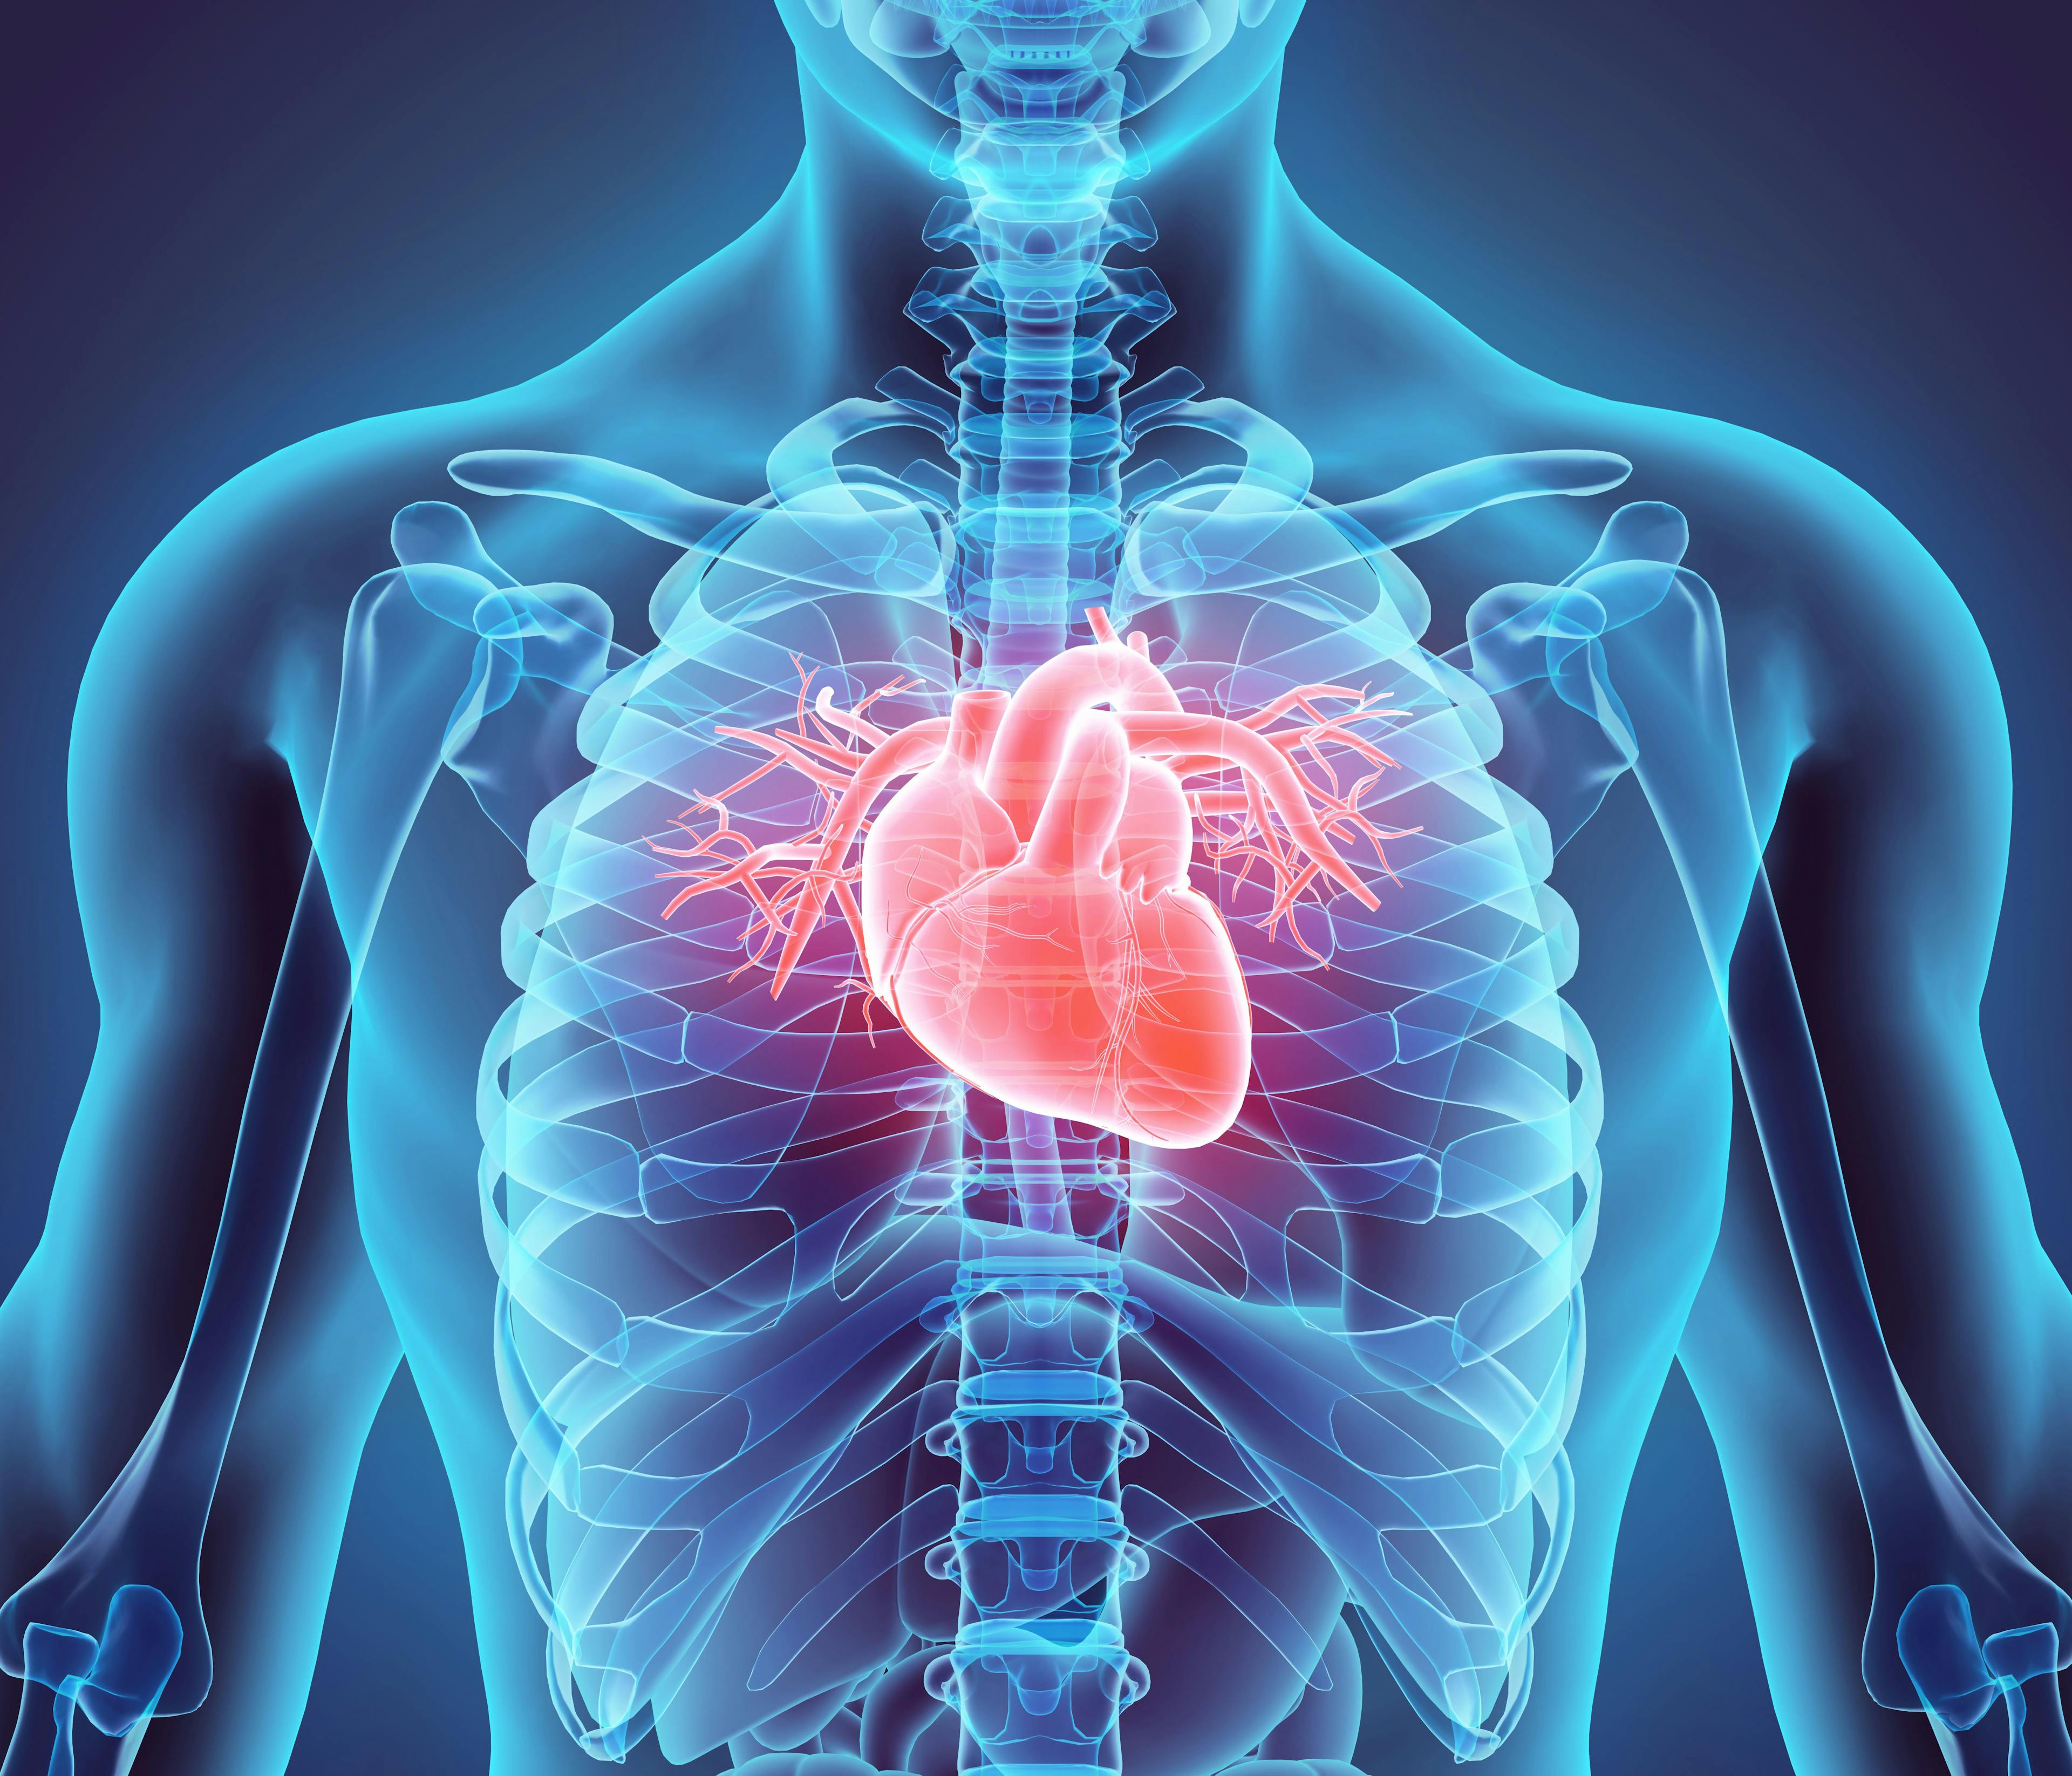 A Review of Treatment Options, Guidelines for Heart Failure With Preserved Ejection Fraction